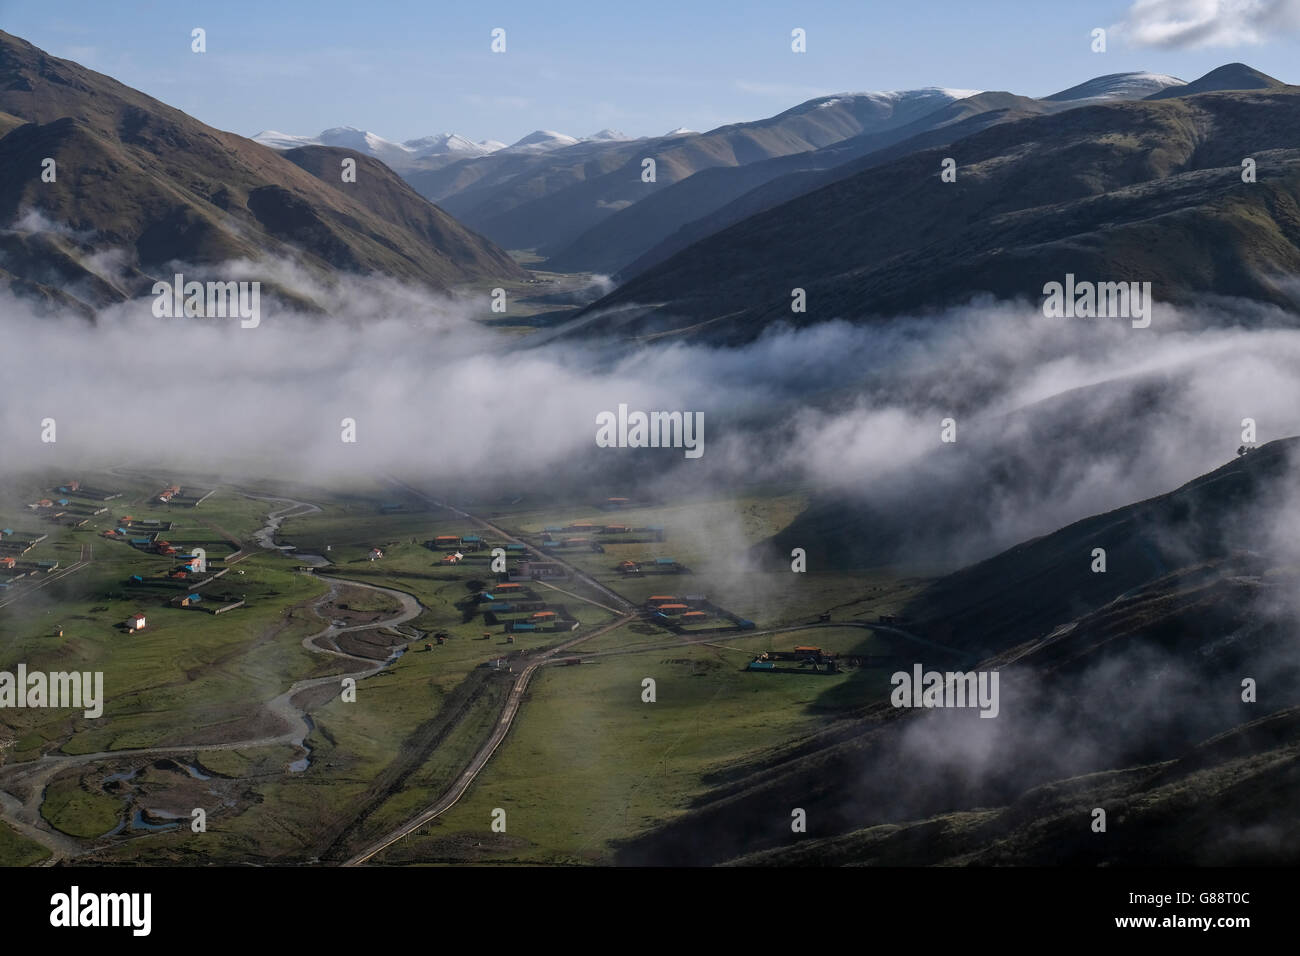 Valley and mountains, Sertar, Sichuan, China Stock Photo